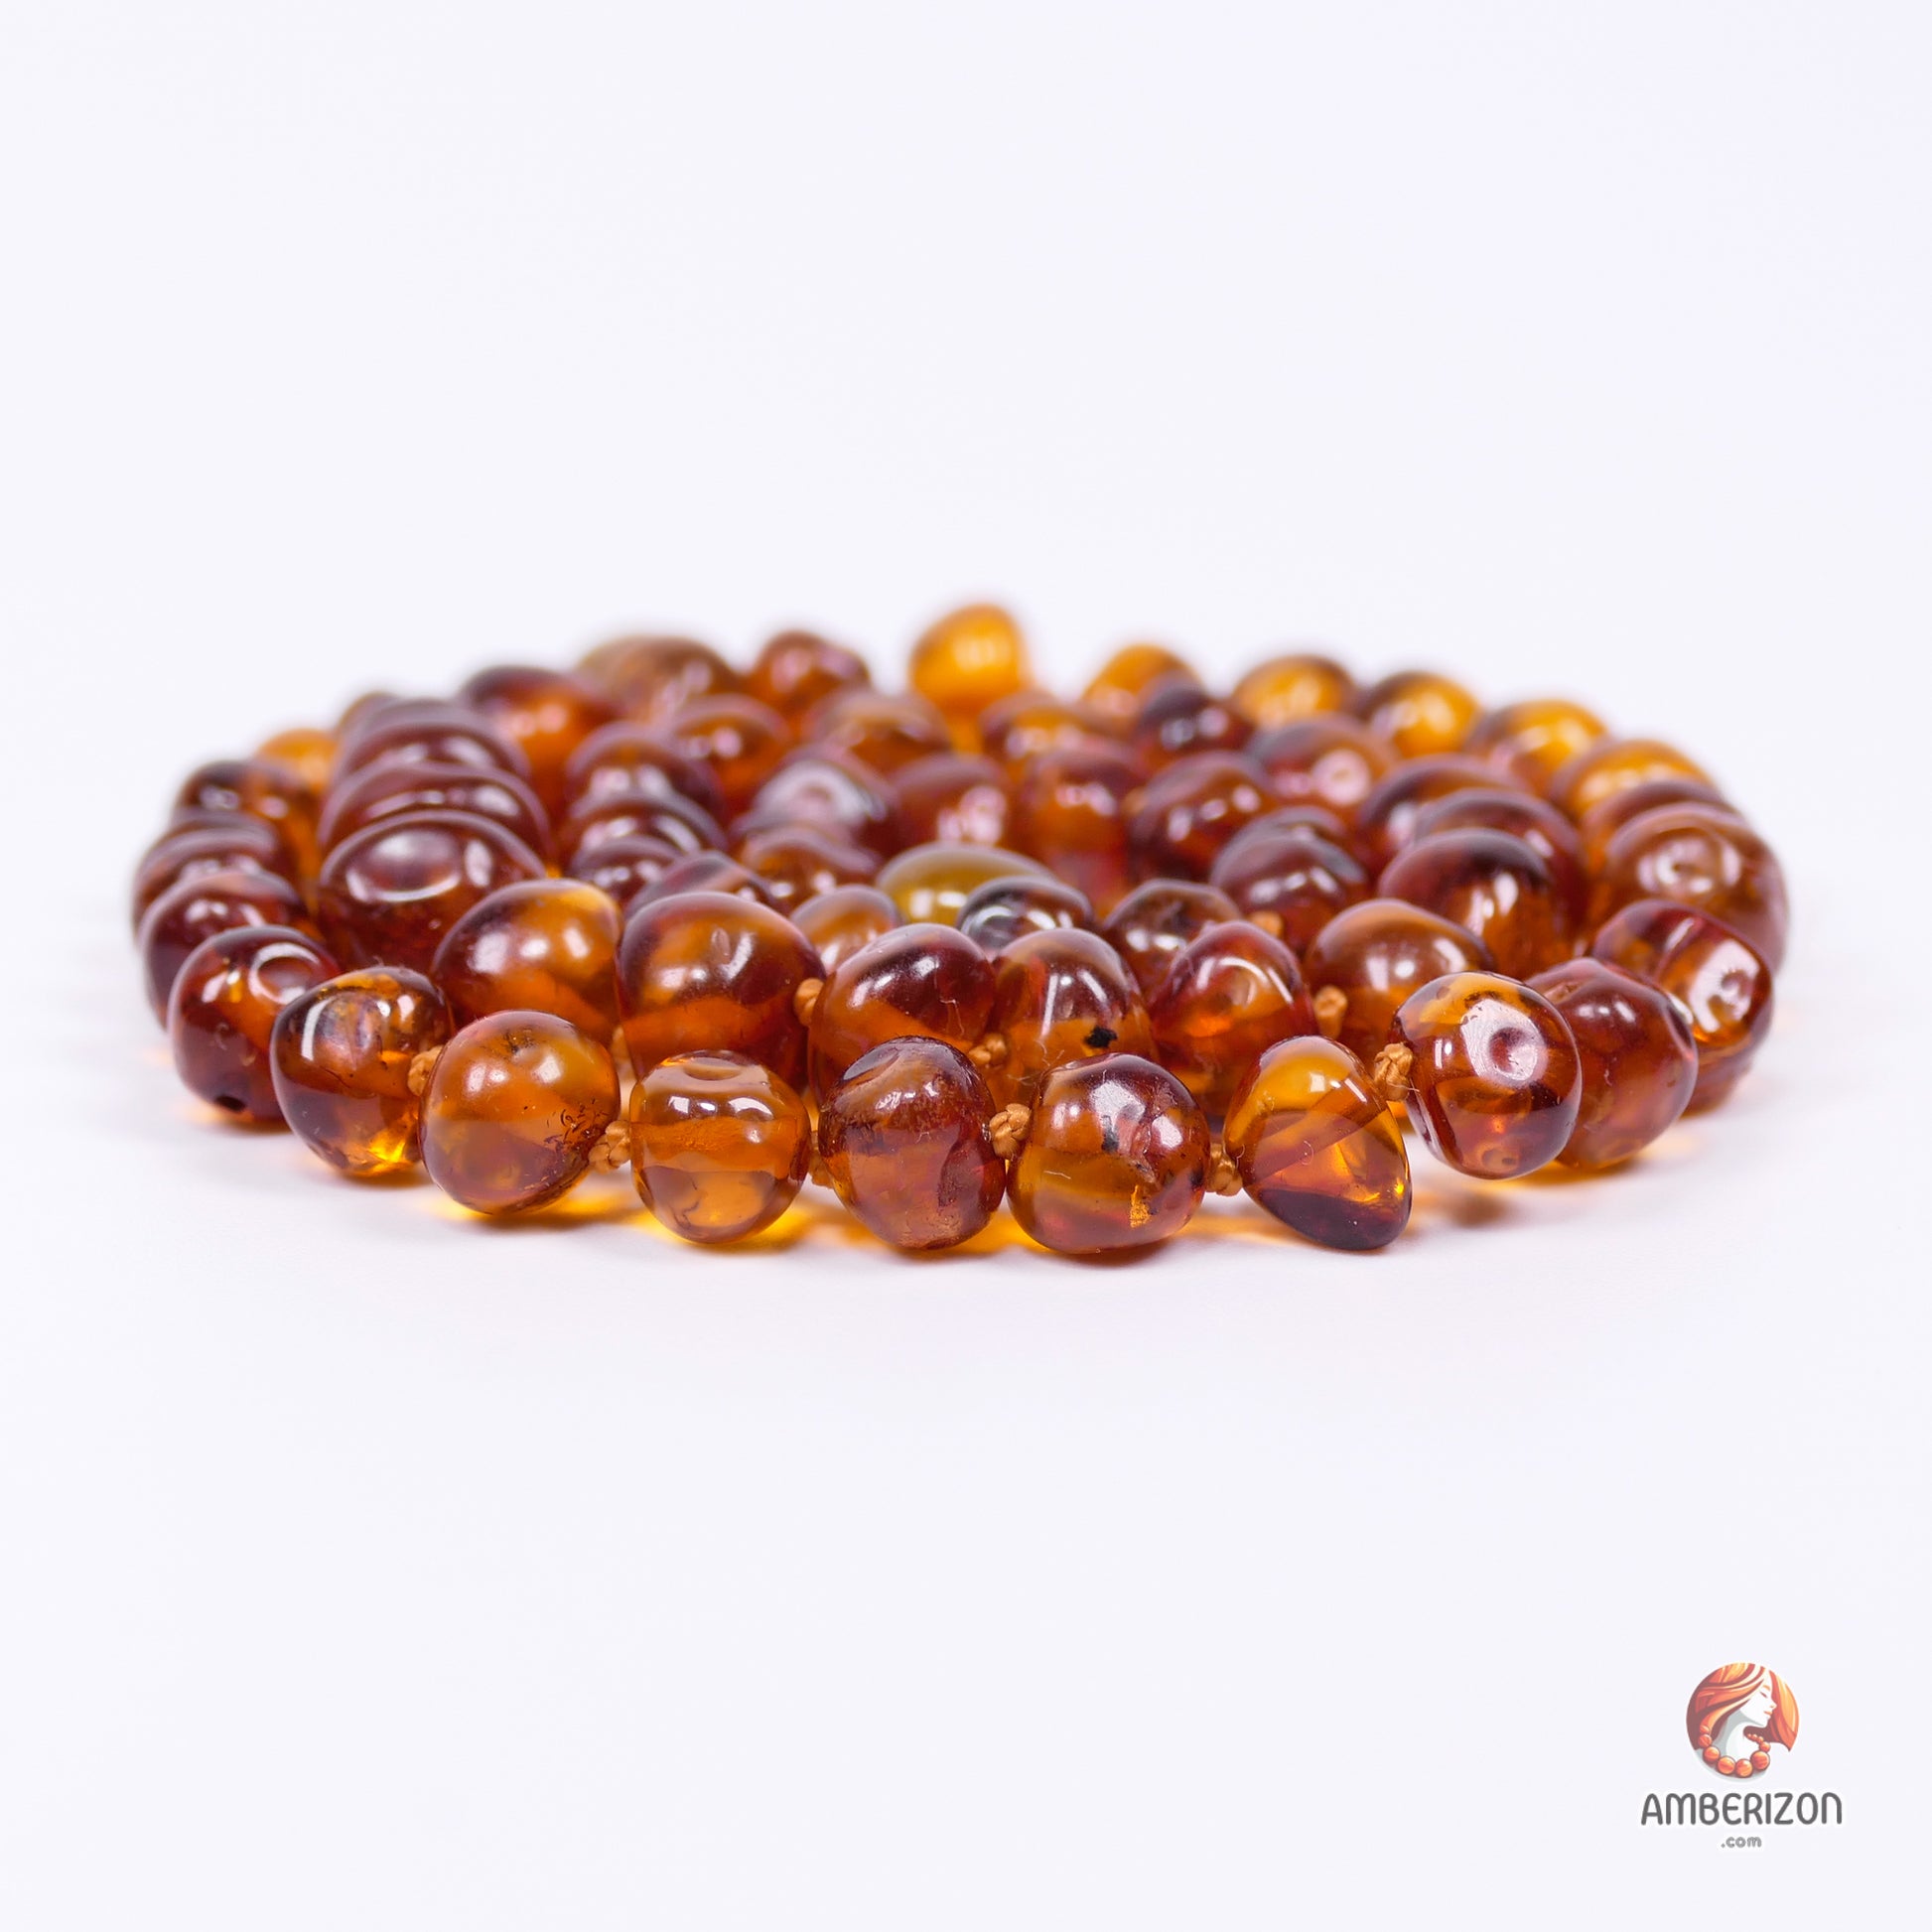 Women's necklace - Clear polished baroque amber beads - Cognac color